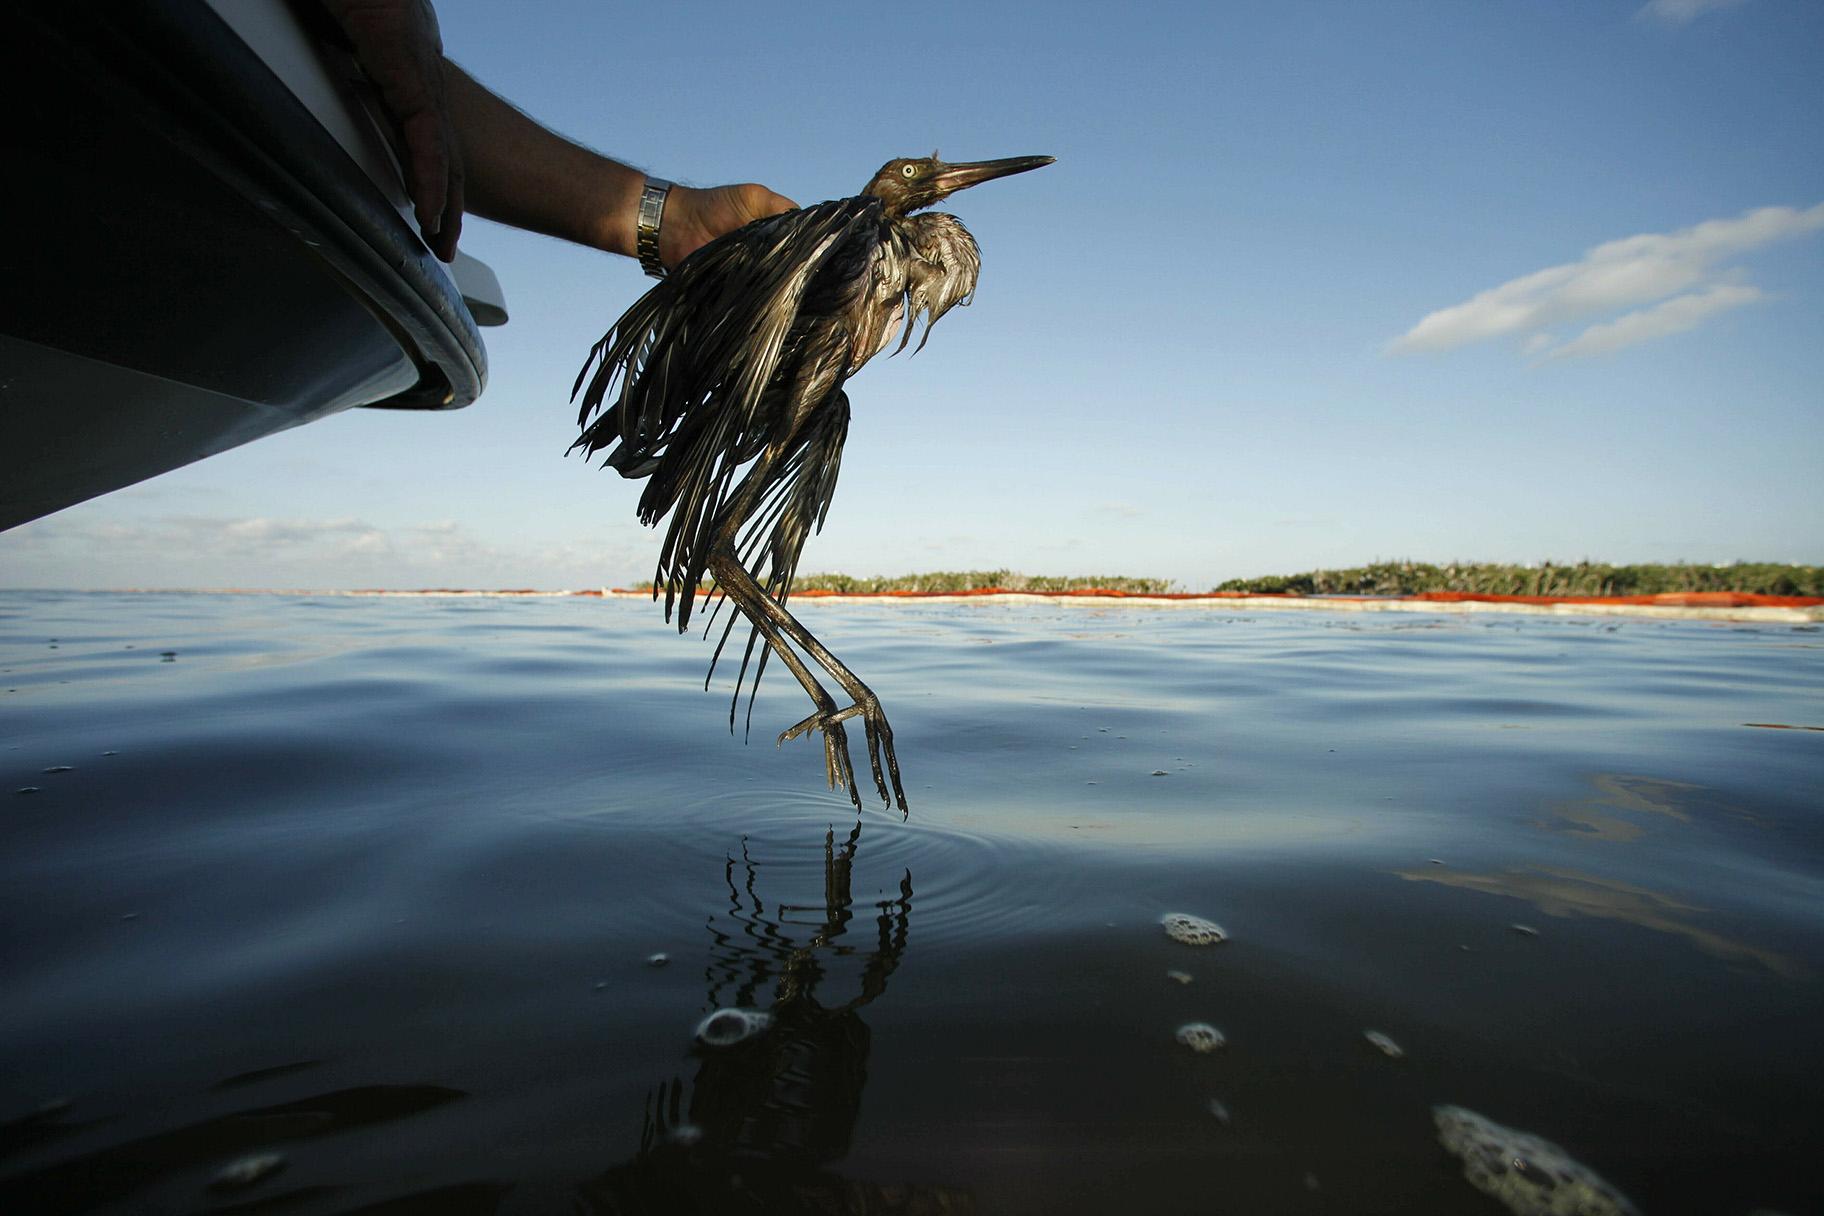 In this June 26, 2010 file photo, Plaquemines Parish Coastal Zone Director P.J. Hahn rescues a heavily oiled bird from the waters of Barataria Bay, La. (AP Photo / Gerald Herbert, File)